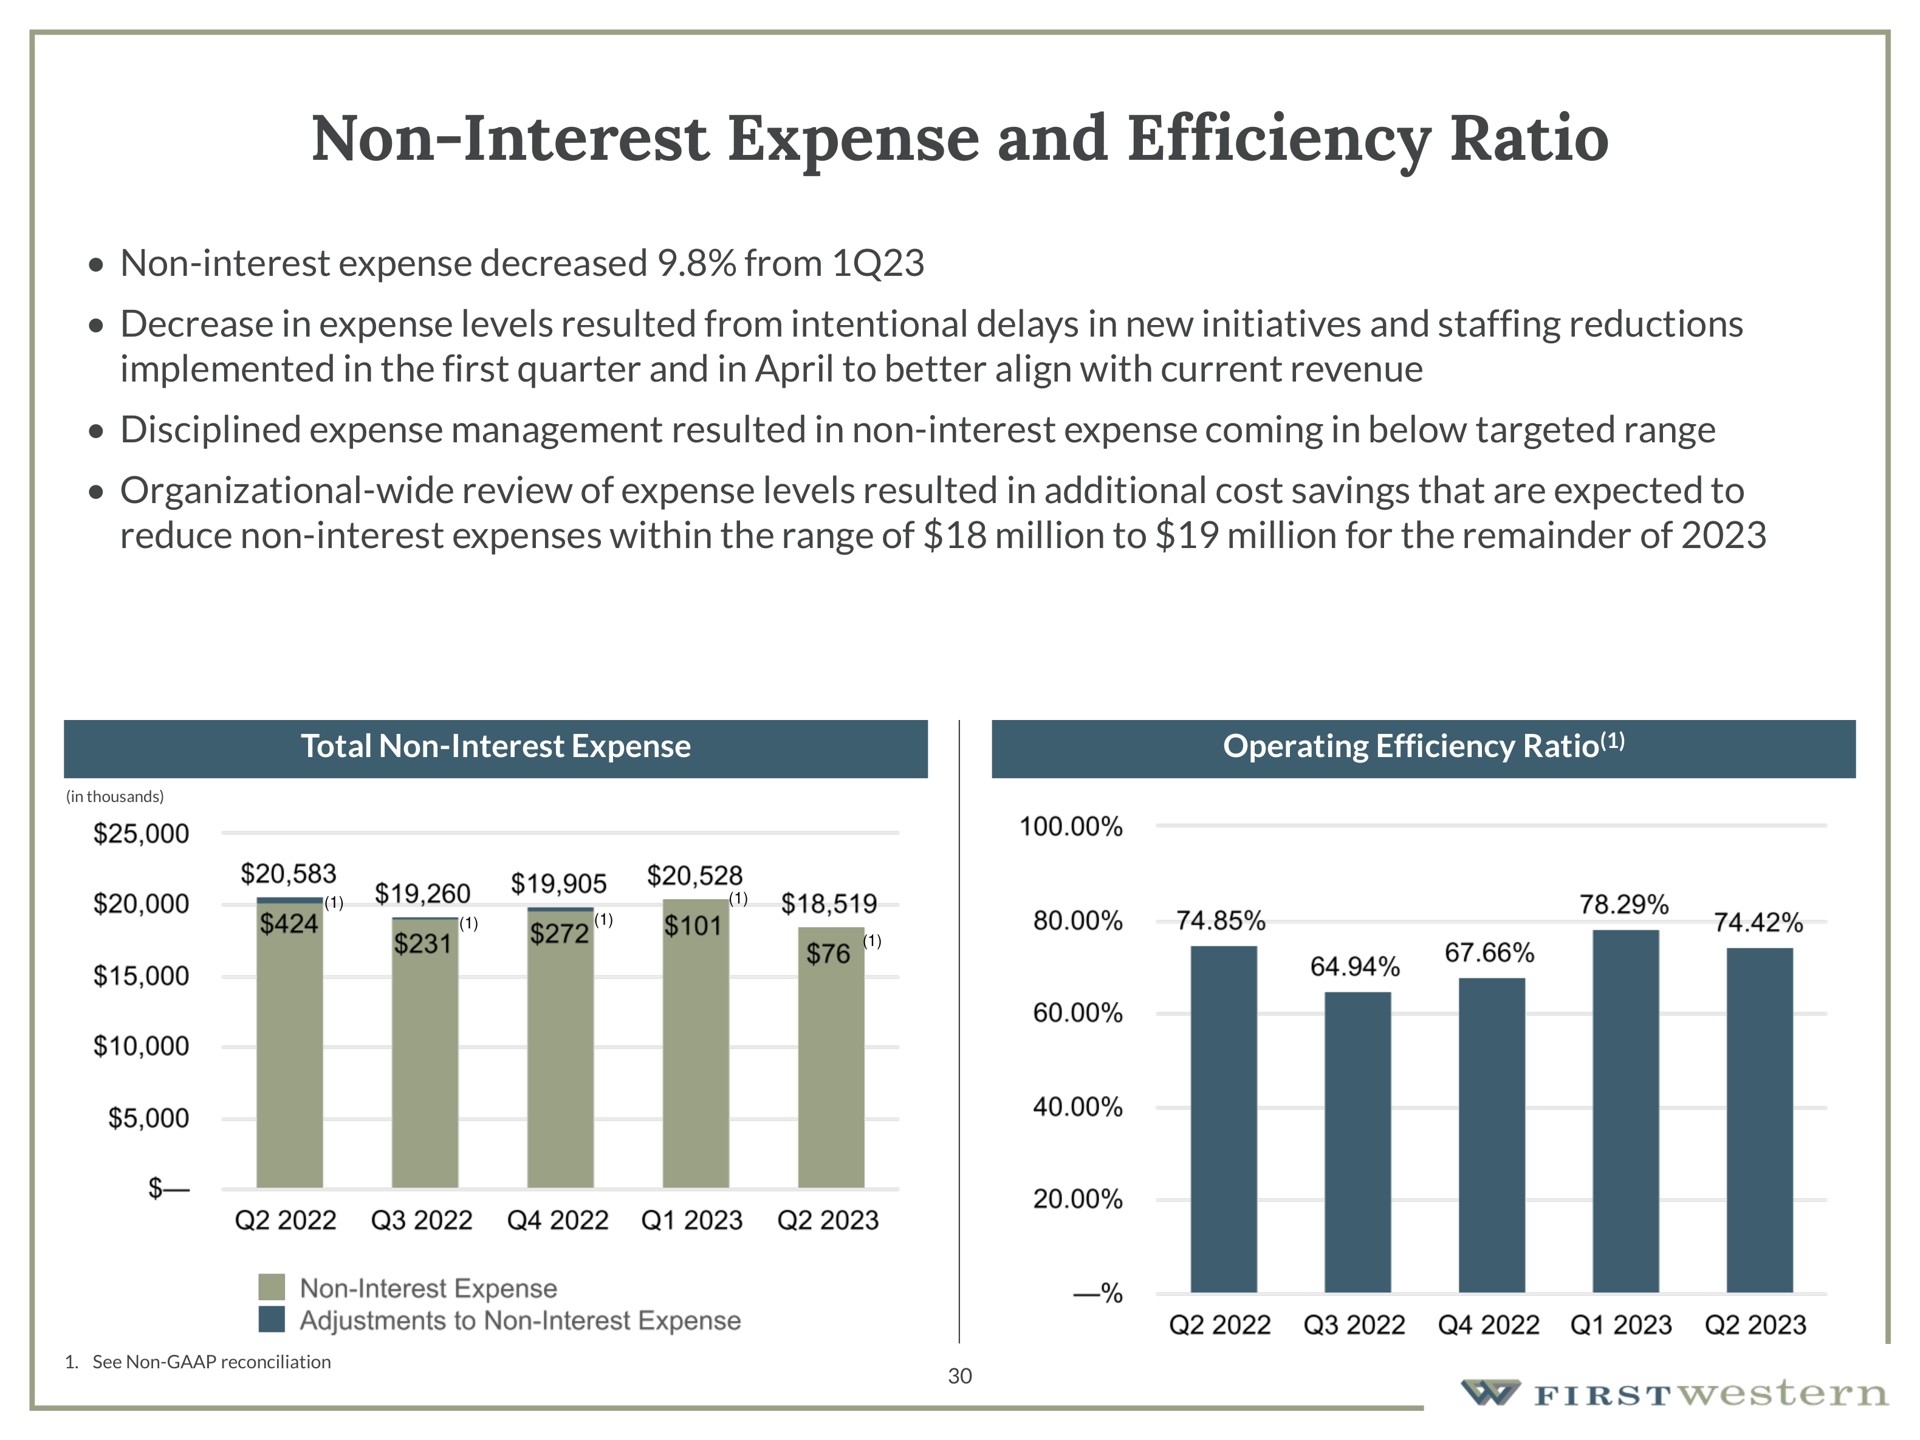 non interest expense and efficiency ratio non interest expense decreased from decrease in expense levels resulted from intentional delays in new initiatives and staffing reductions implemented in the first quarter and in to better align with current revenue disciplined expense management resulted in non interest expense coming in below targeted range organizational wide review of expense levels resulted in additional cost savings that are expected to reduce non interest expenses within the range of million to million for the remainder of a | First Western Financial